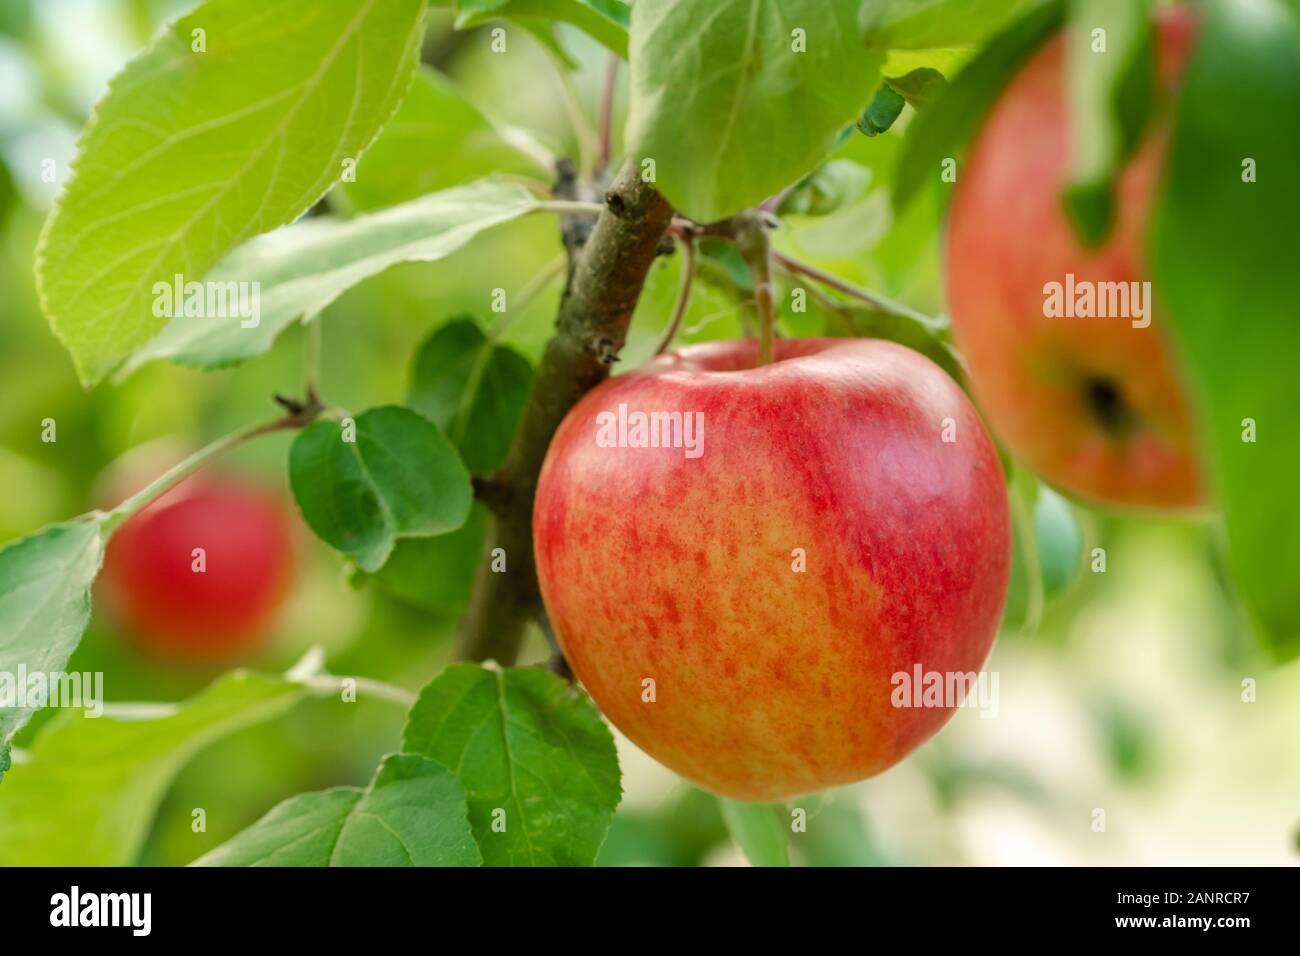 Red apple close-up on the apple tree Stock Photo